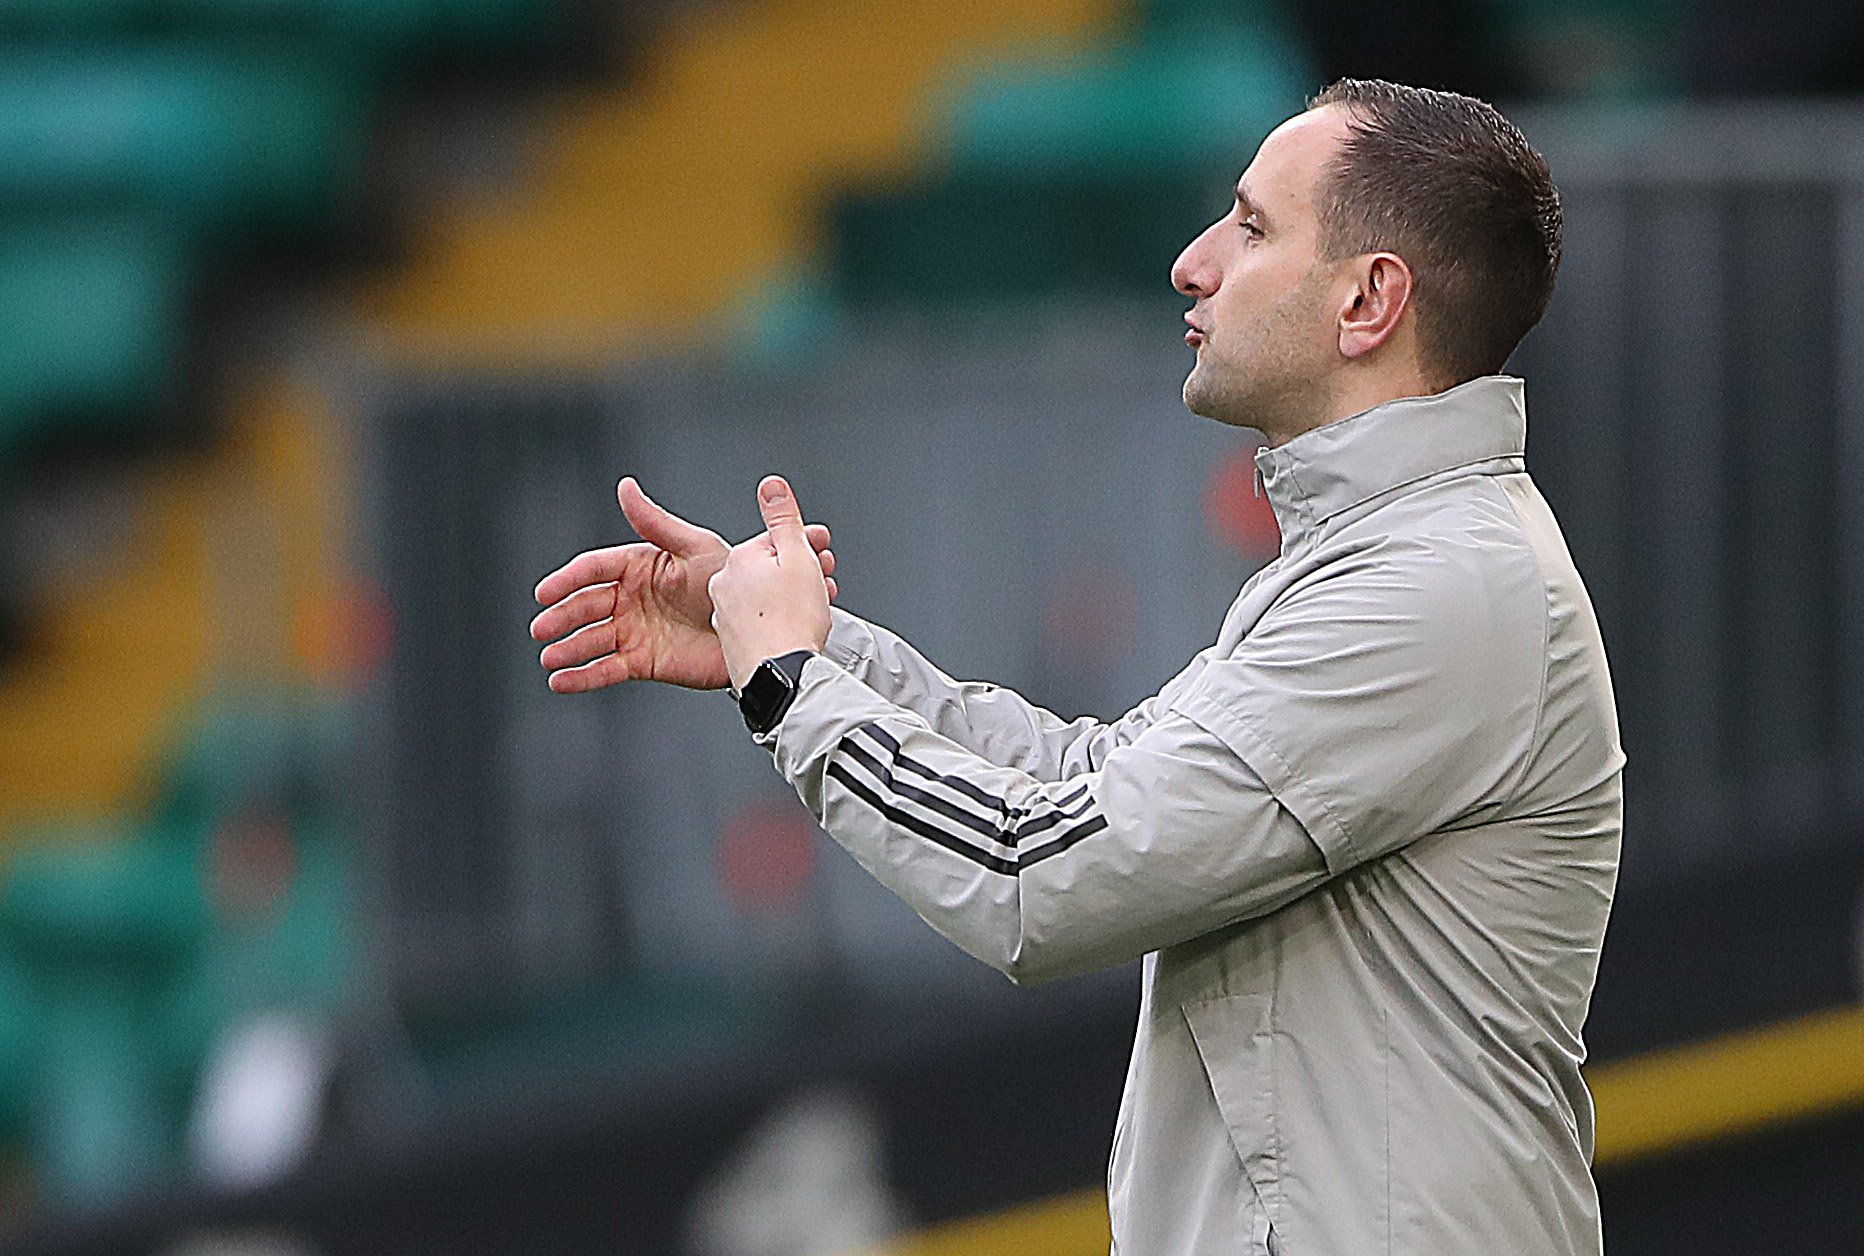 "We have to face up to the season": Celtic interim boss John Kennedy